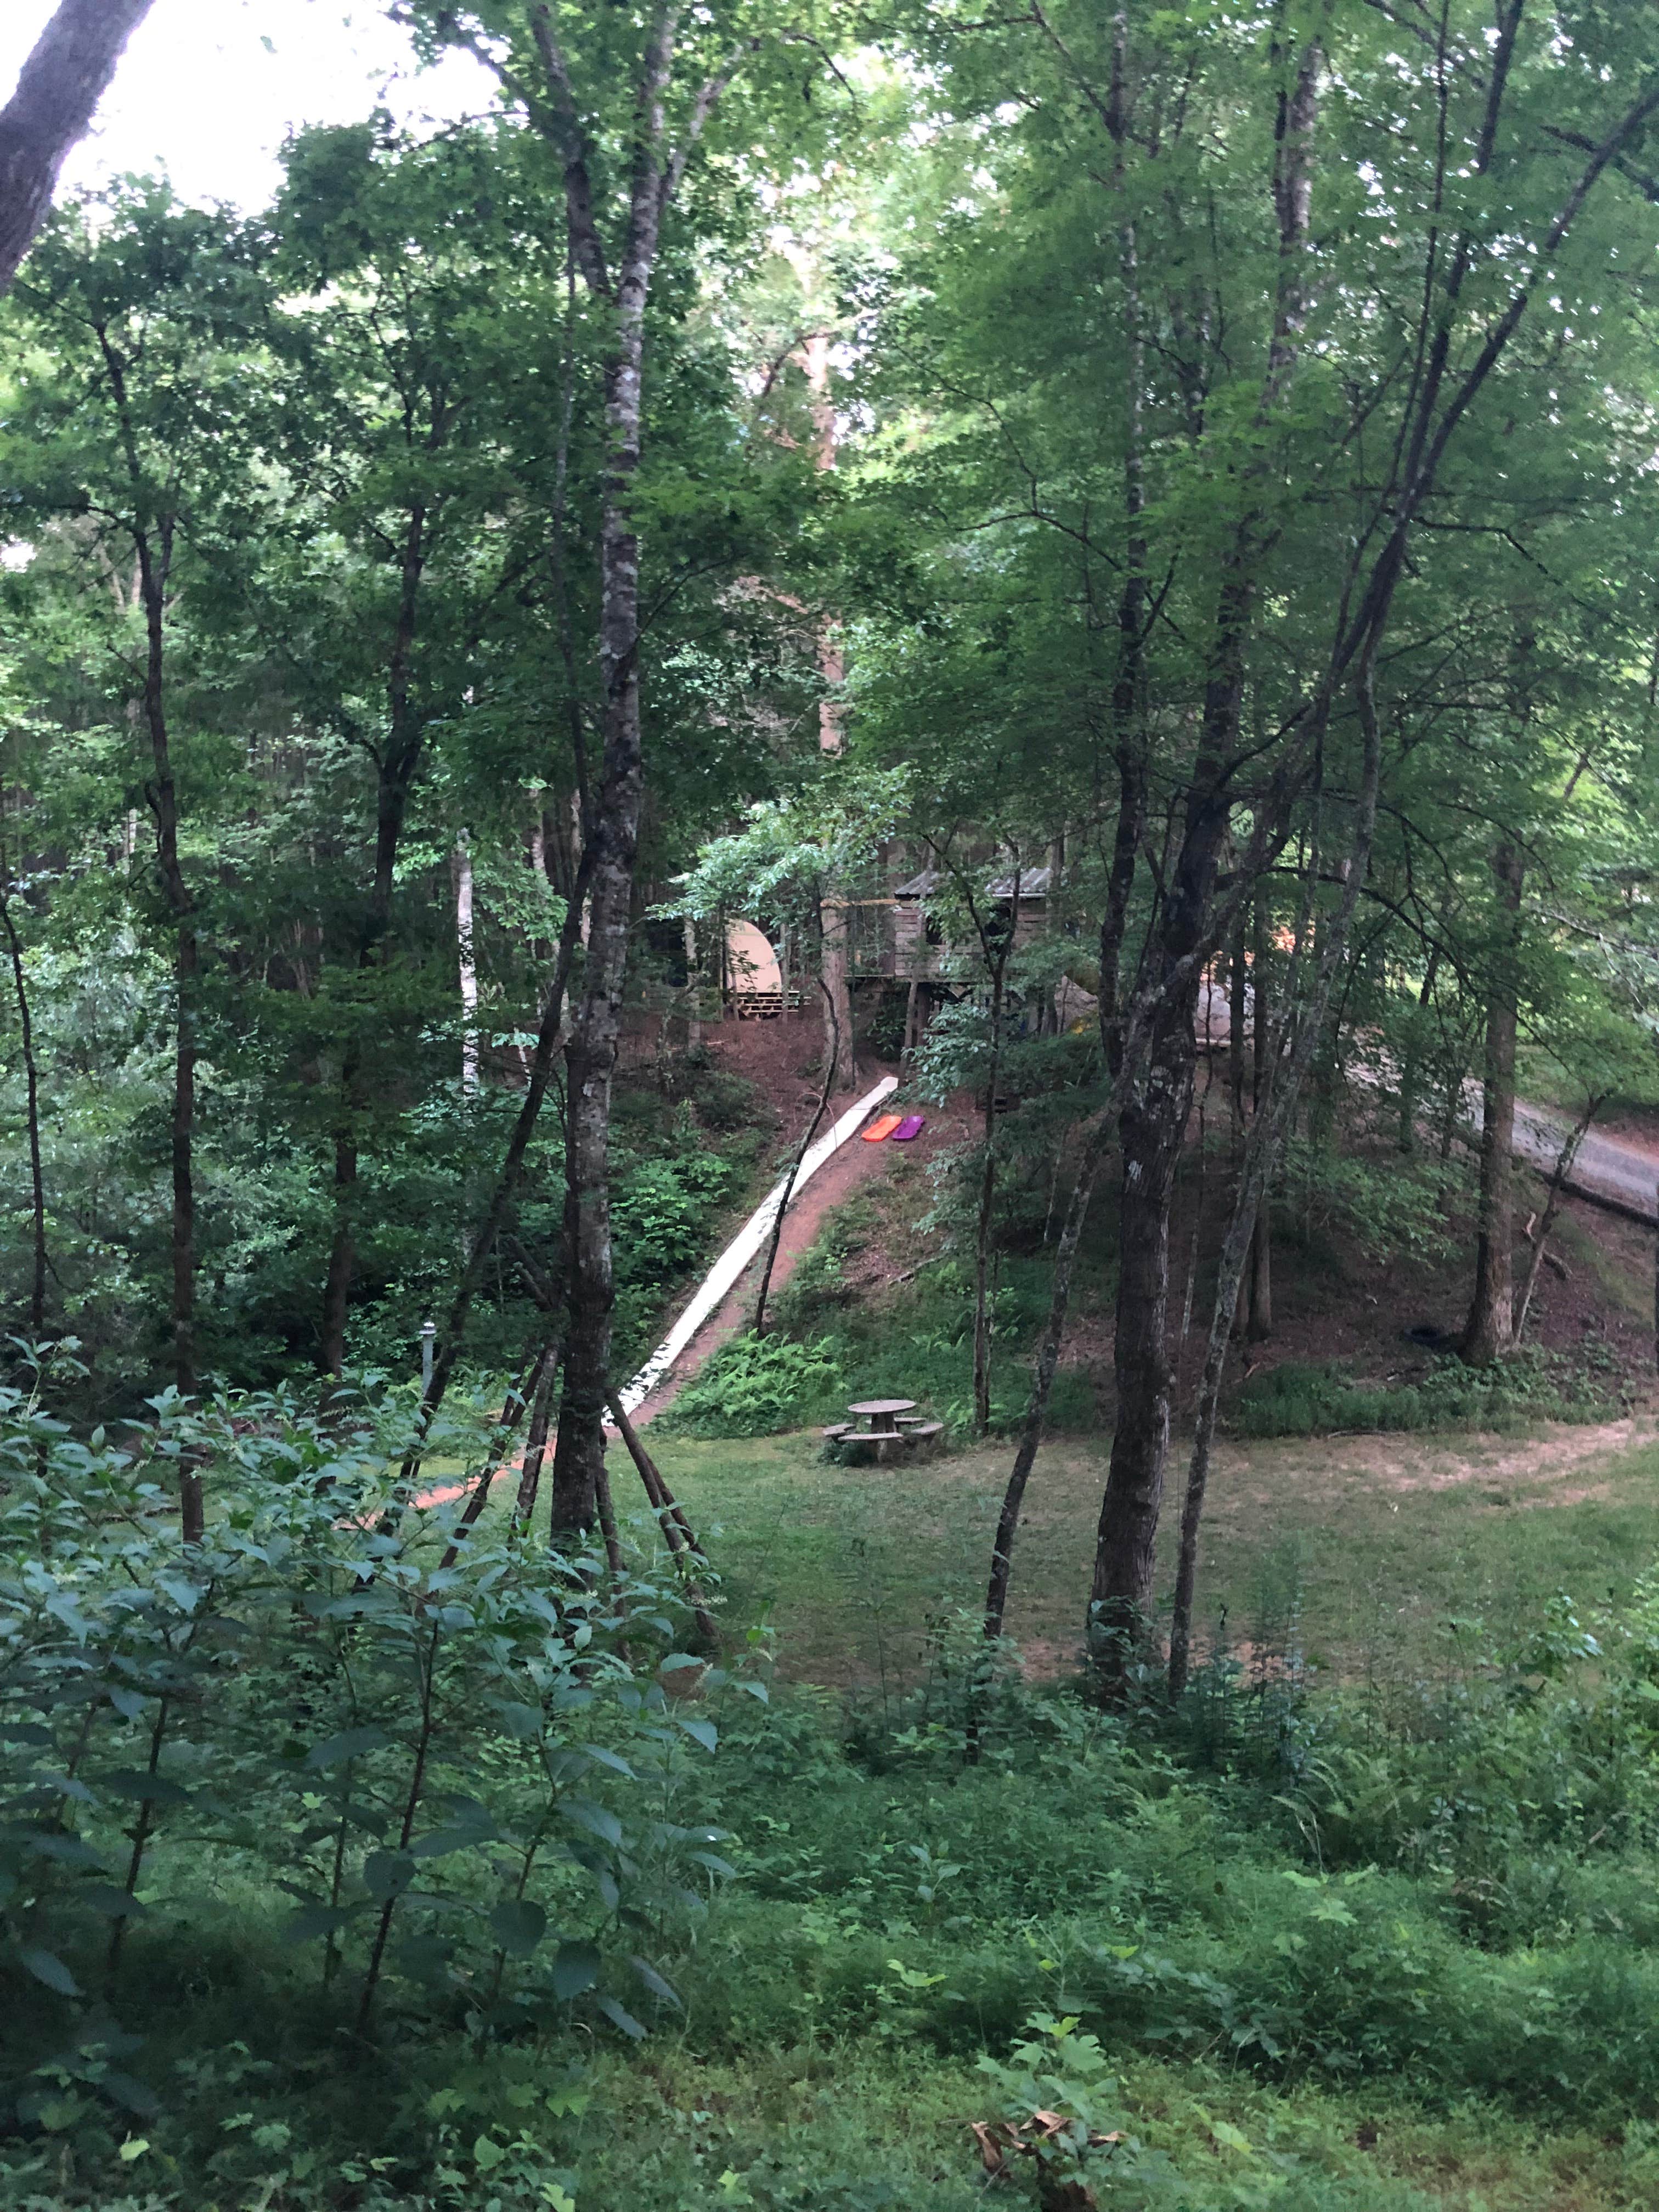 The view of the treehouse and sled slide coming back down the hill with berries.